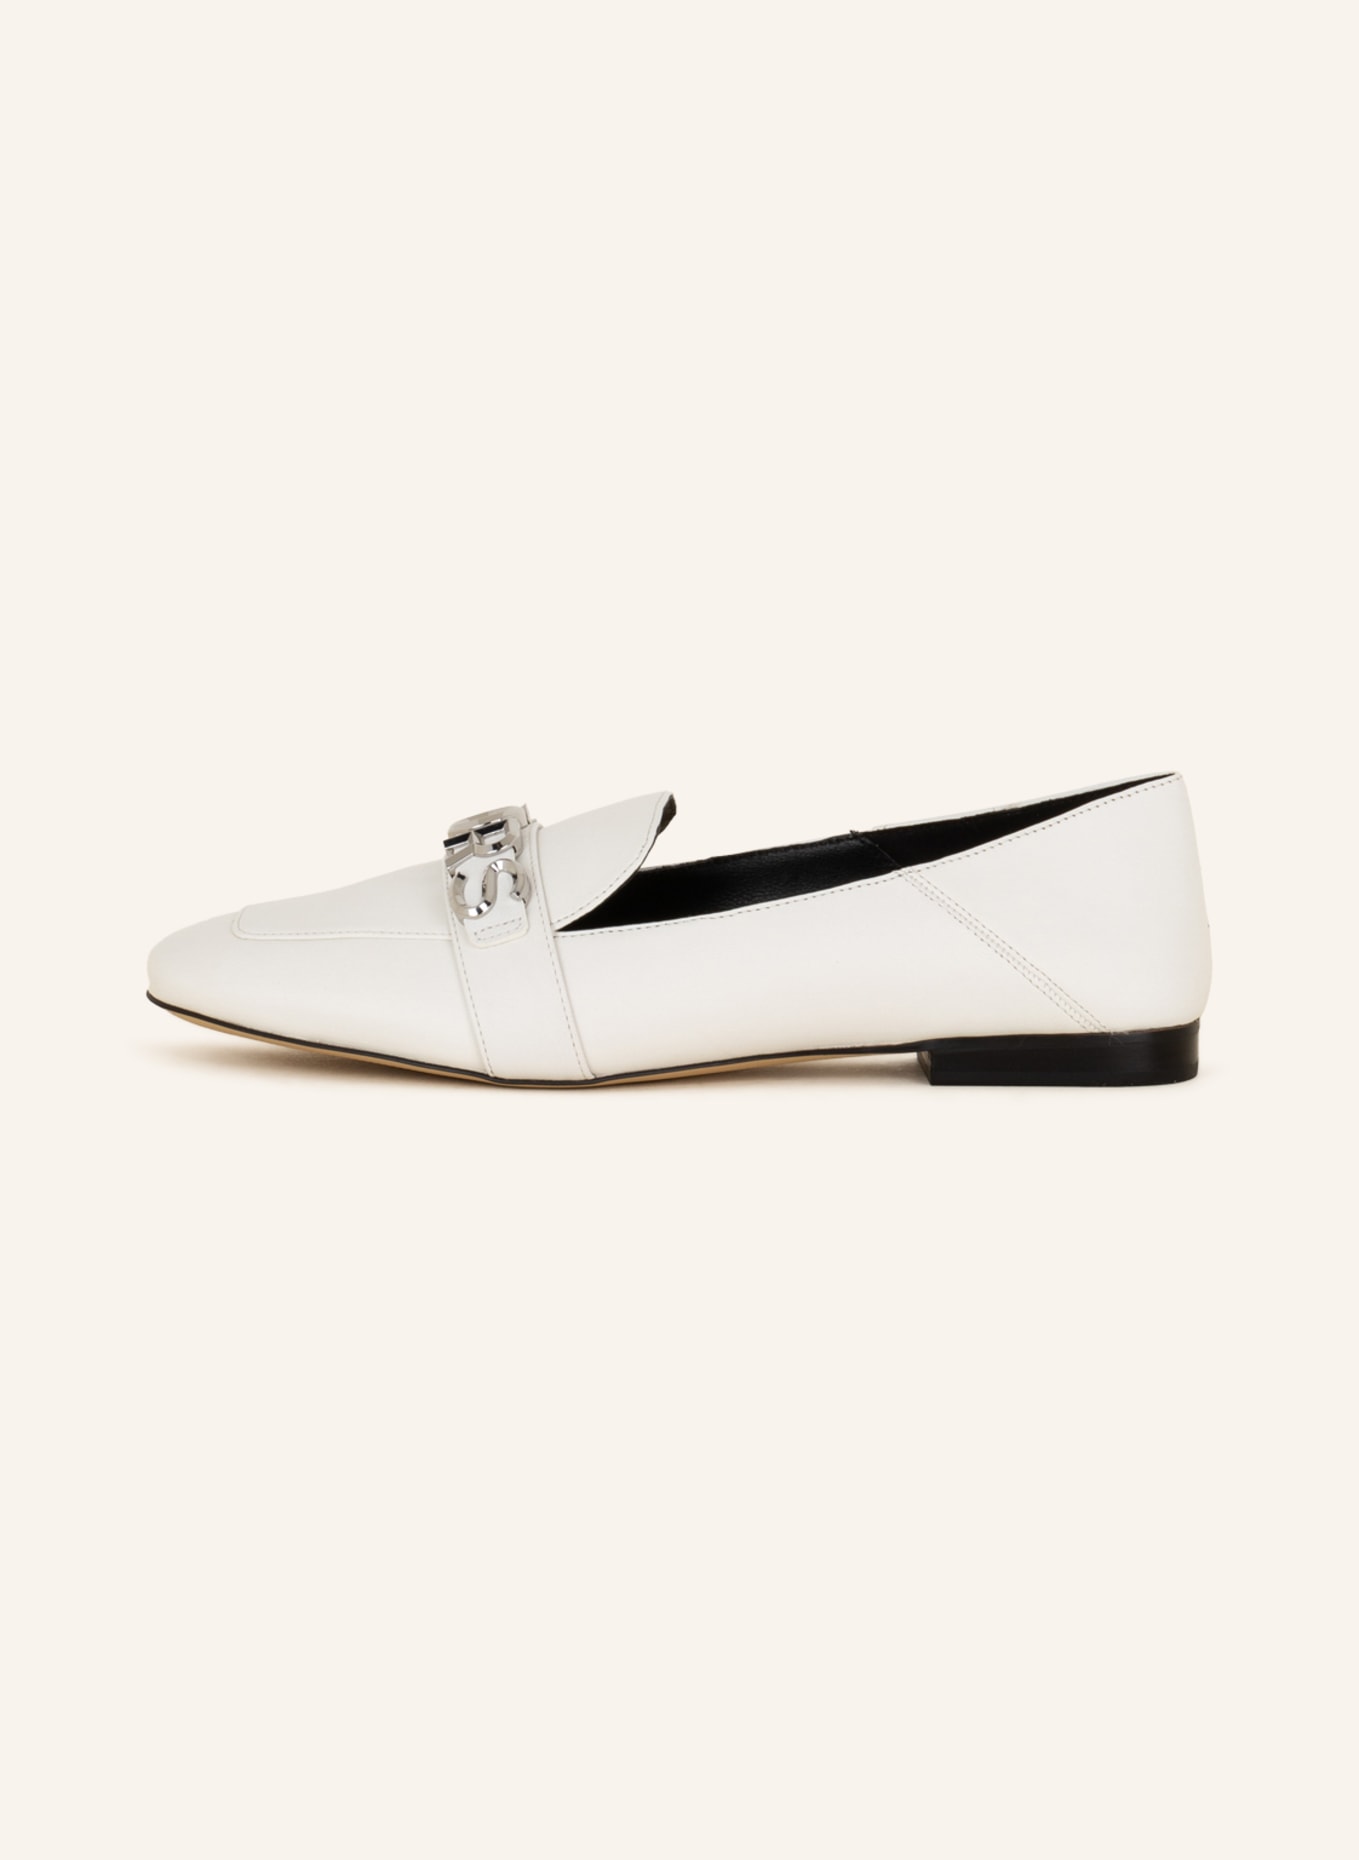 MICHAEL KORS Loafer MADELYN , Farbe: WEISS (Bild 4)